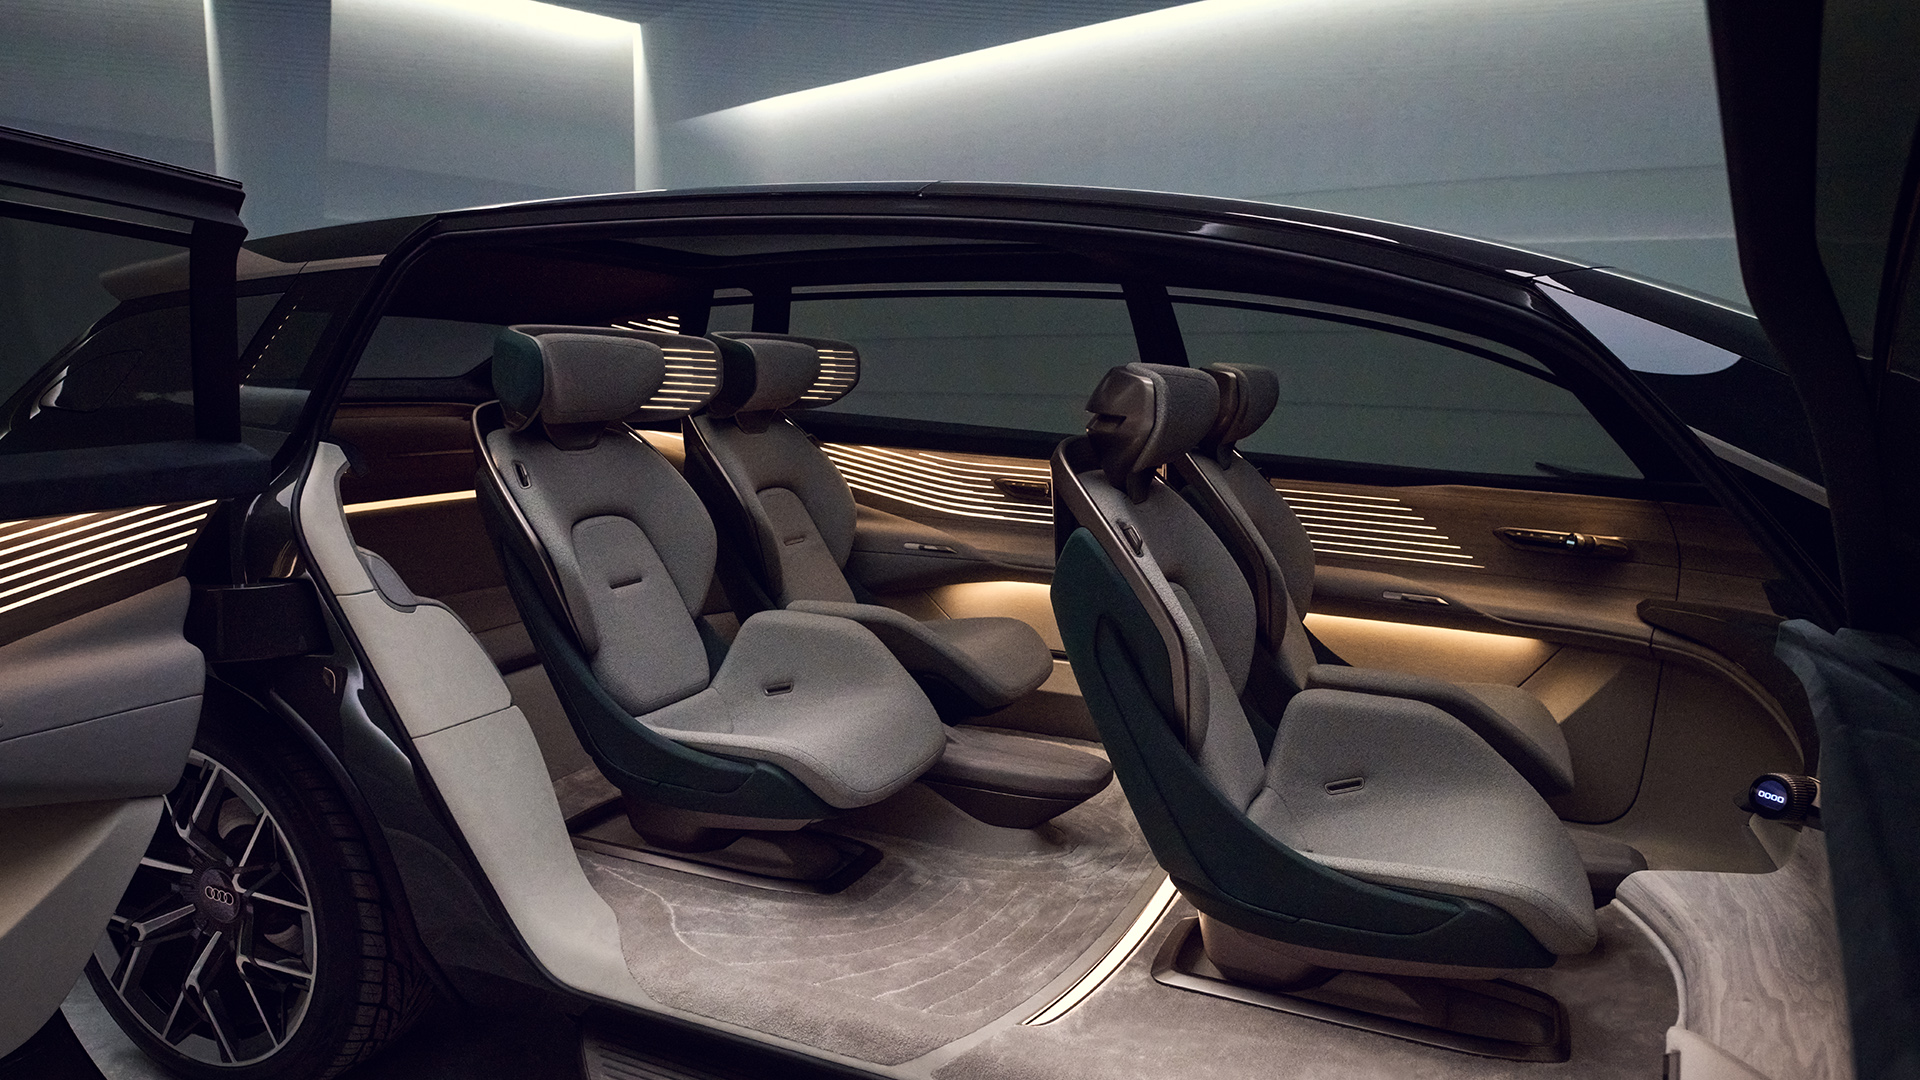 A view inside the Audi urbansphere concept’s interior with its four individual seats.